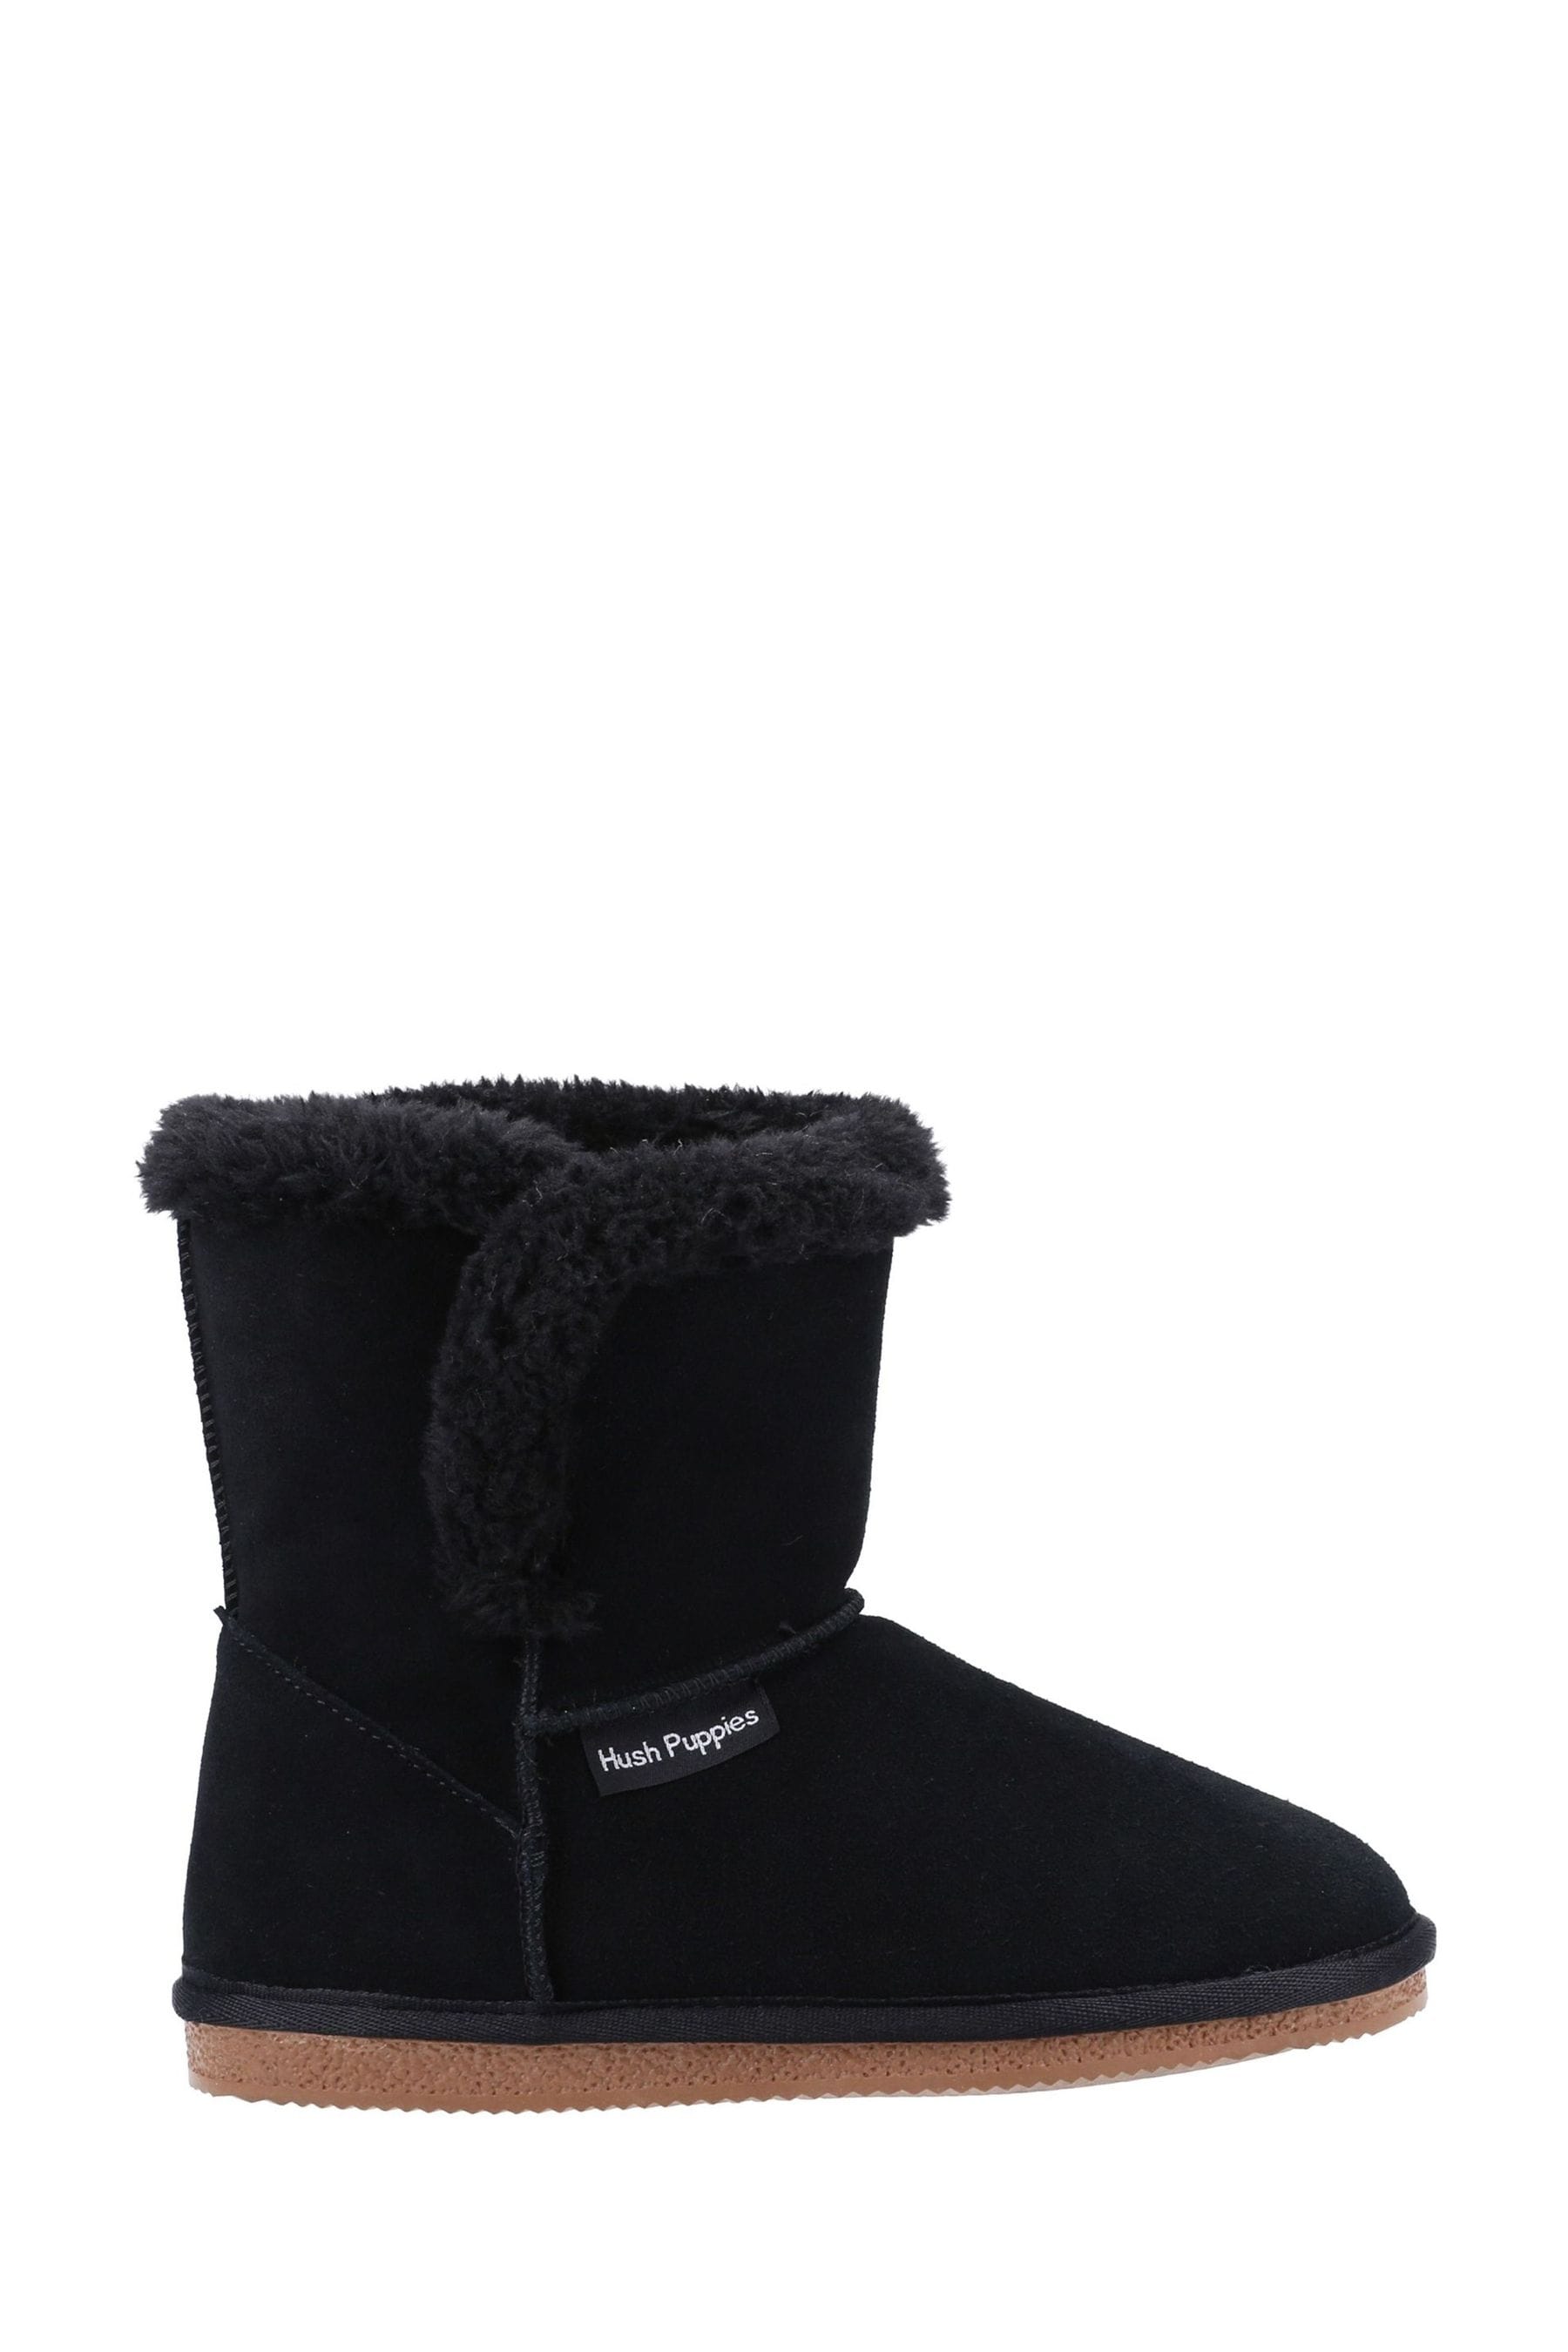 Buy Hush Puppies Ashleigh Slipper Booties from the Next UK online shop